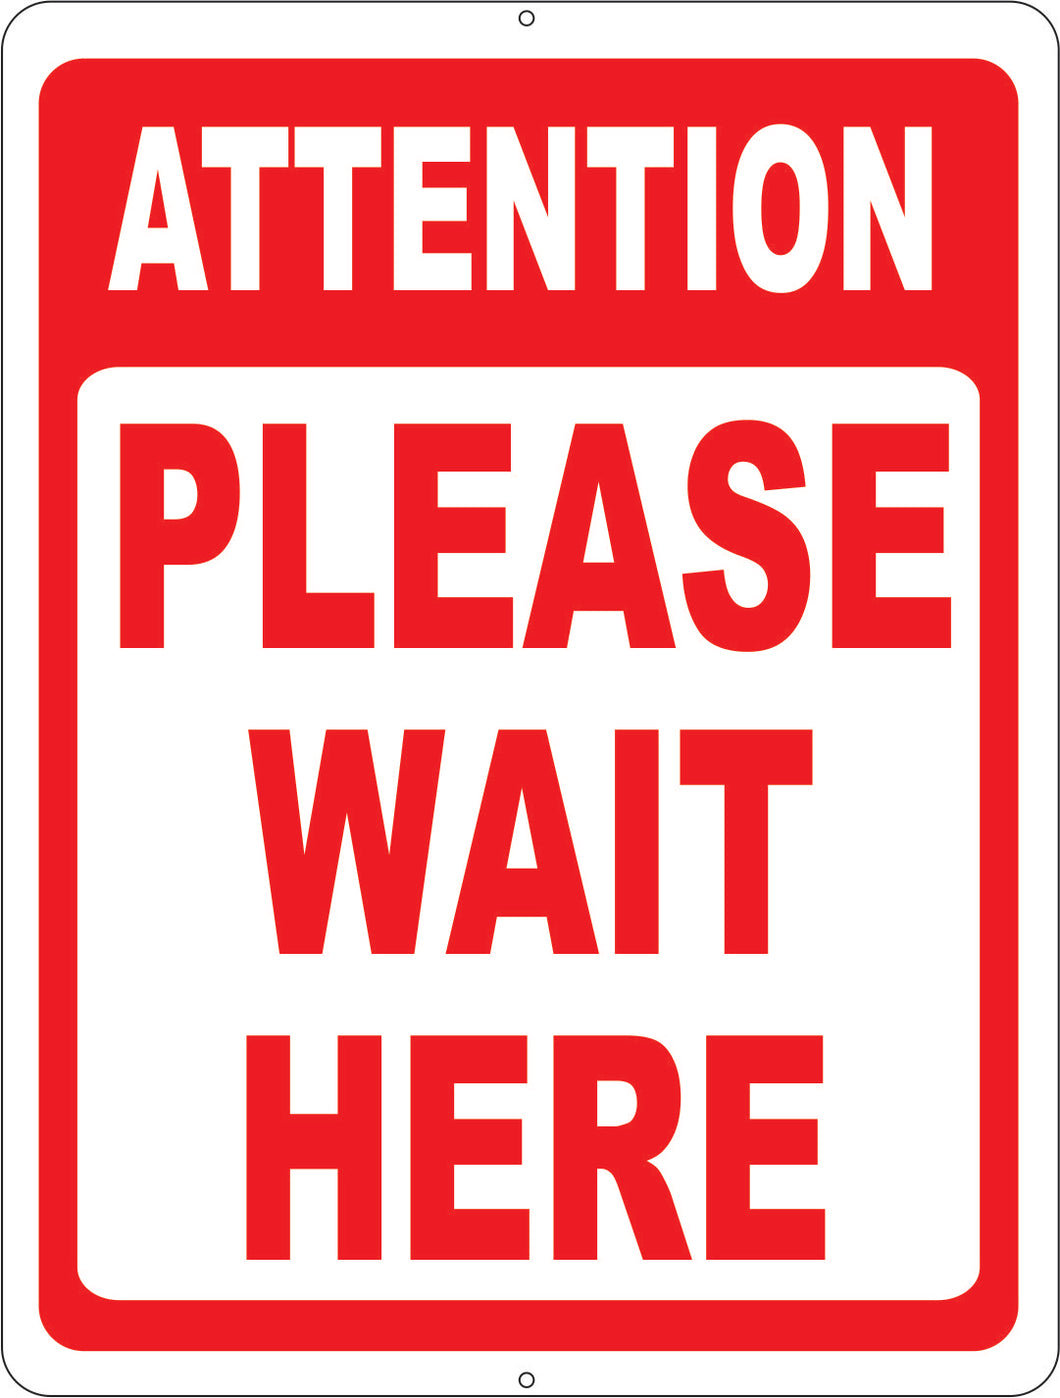 Attention Please Wait Here Sign